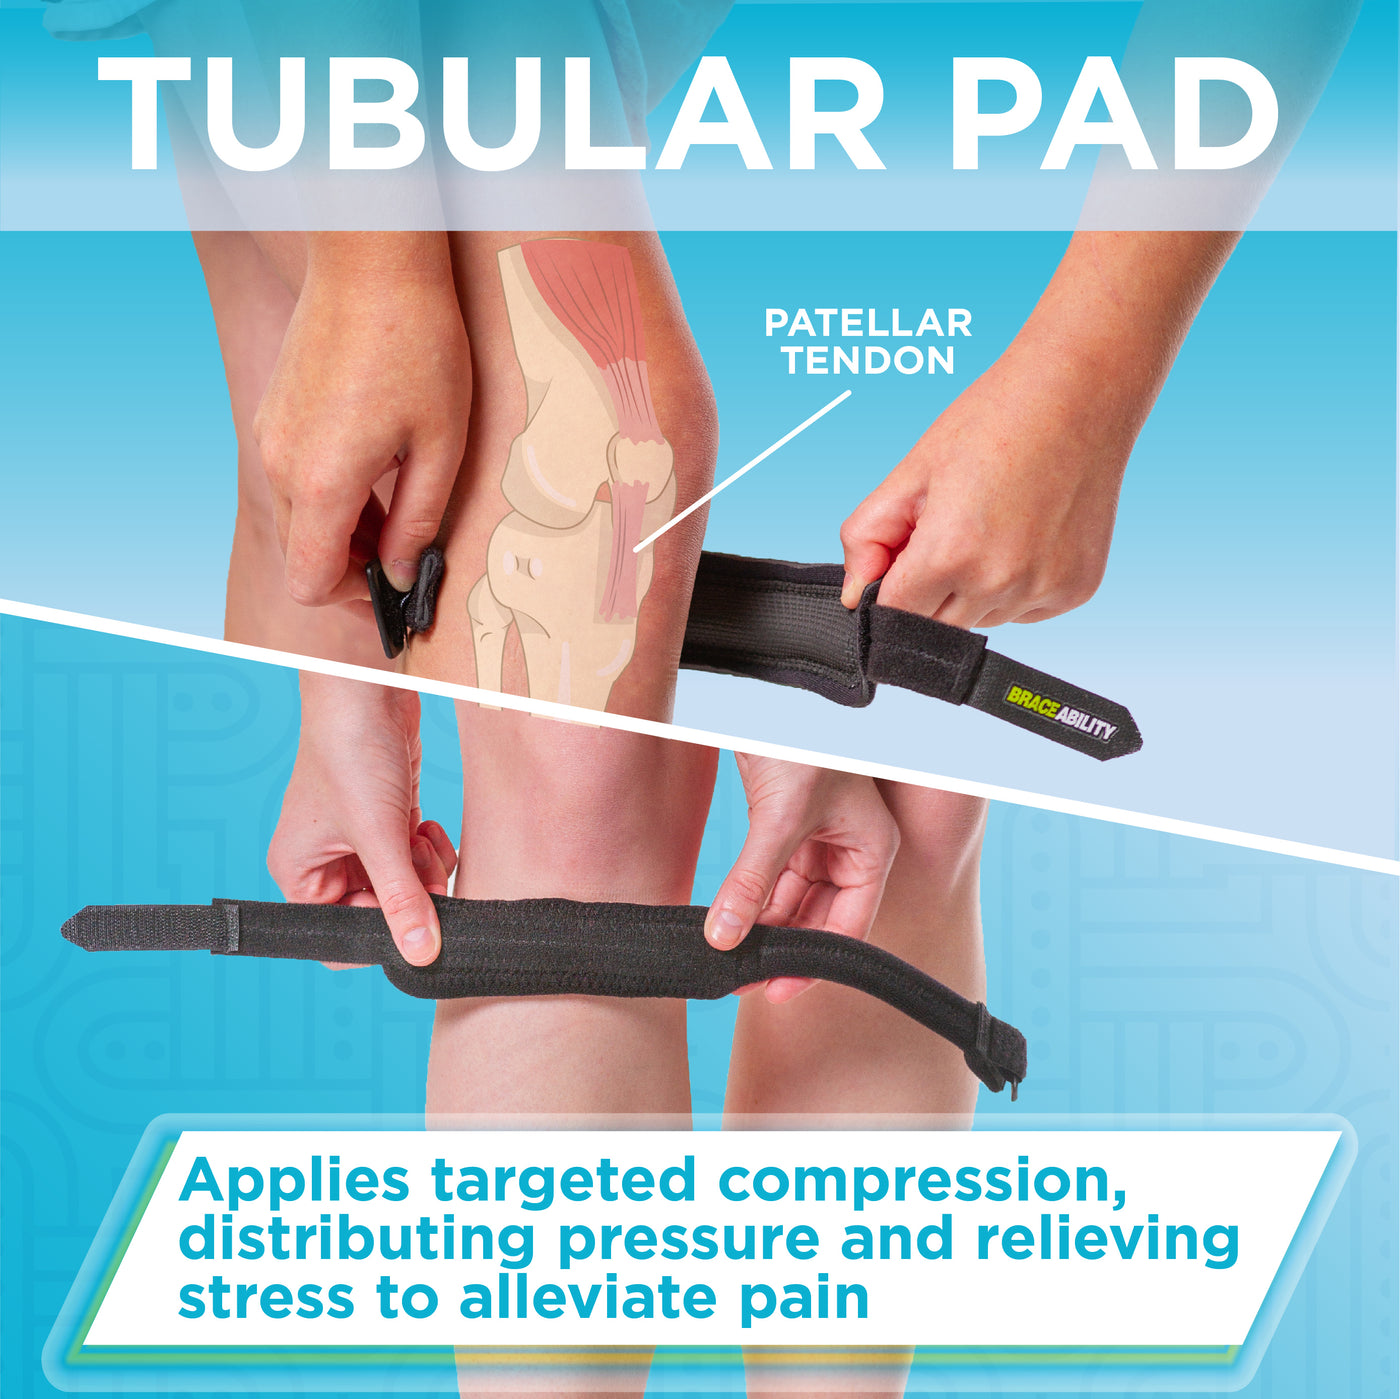 Tubular pad on the knee brace for osgood-schlatter applies targeted compression to the knee, distributing pressure and relieving stress to alleviate pain